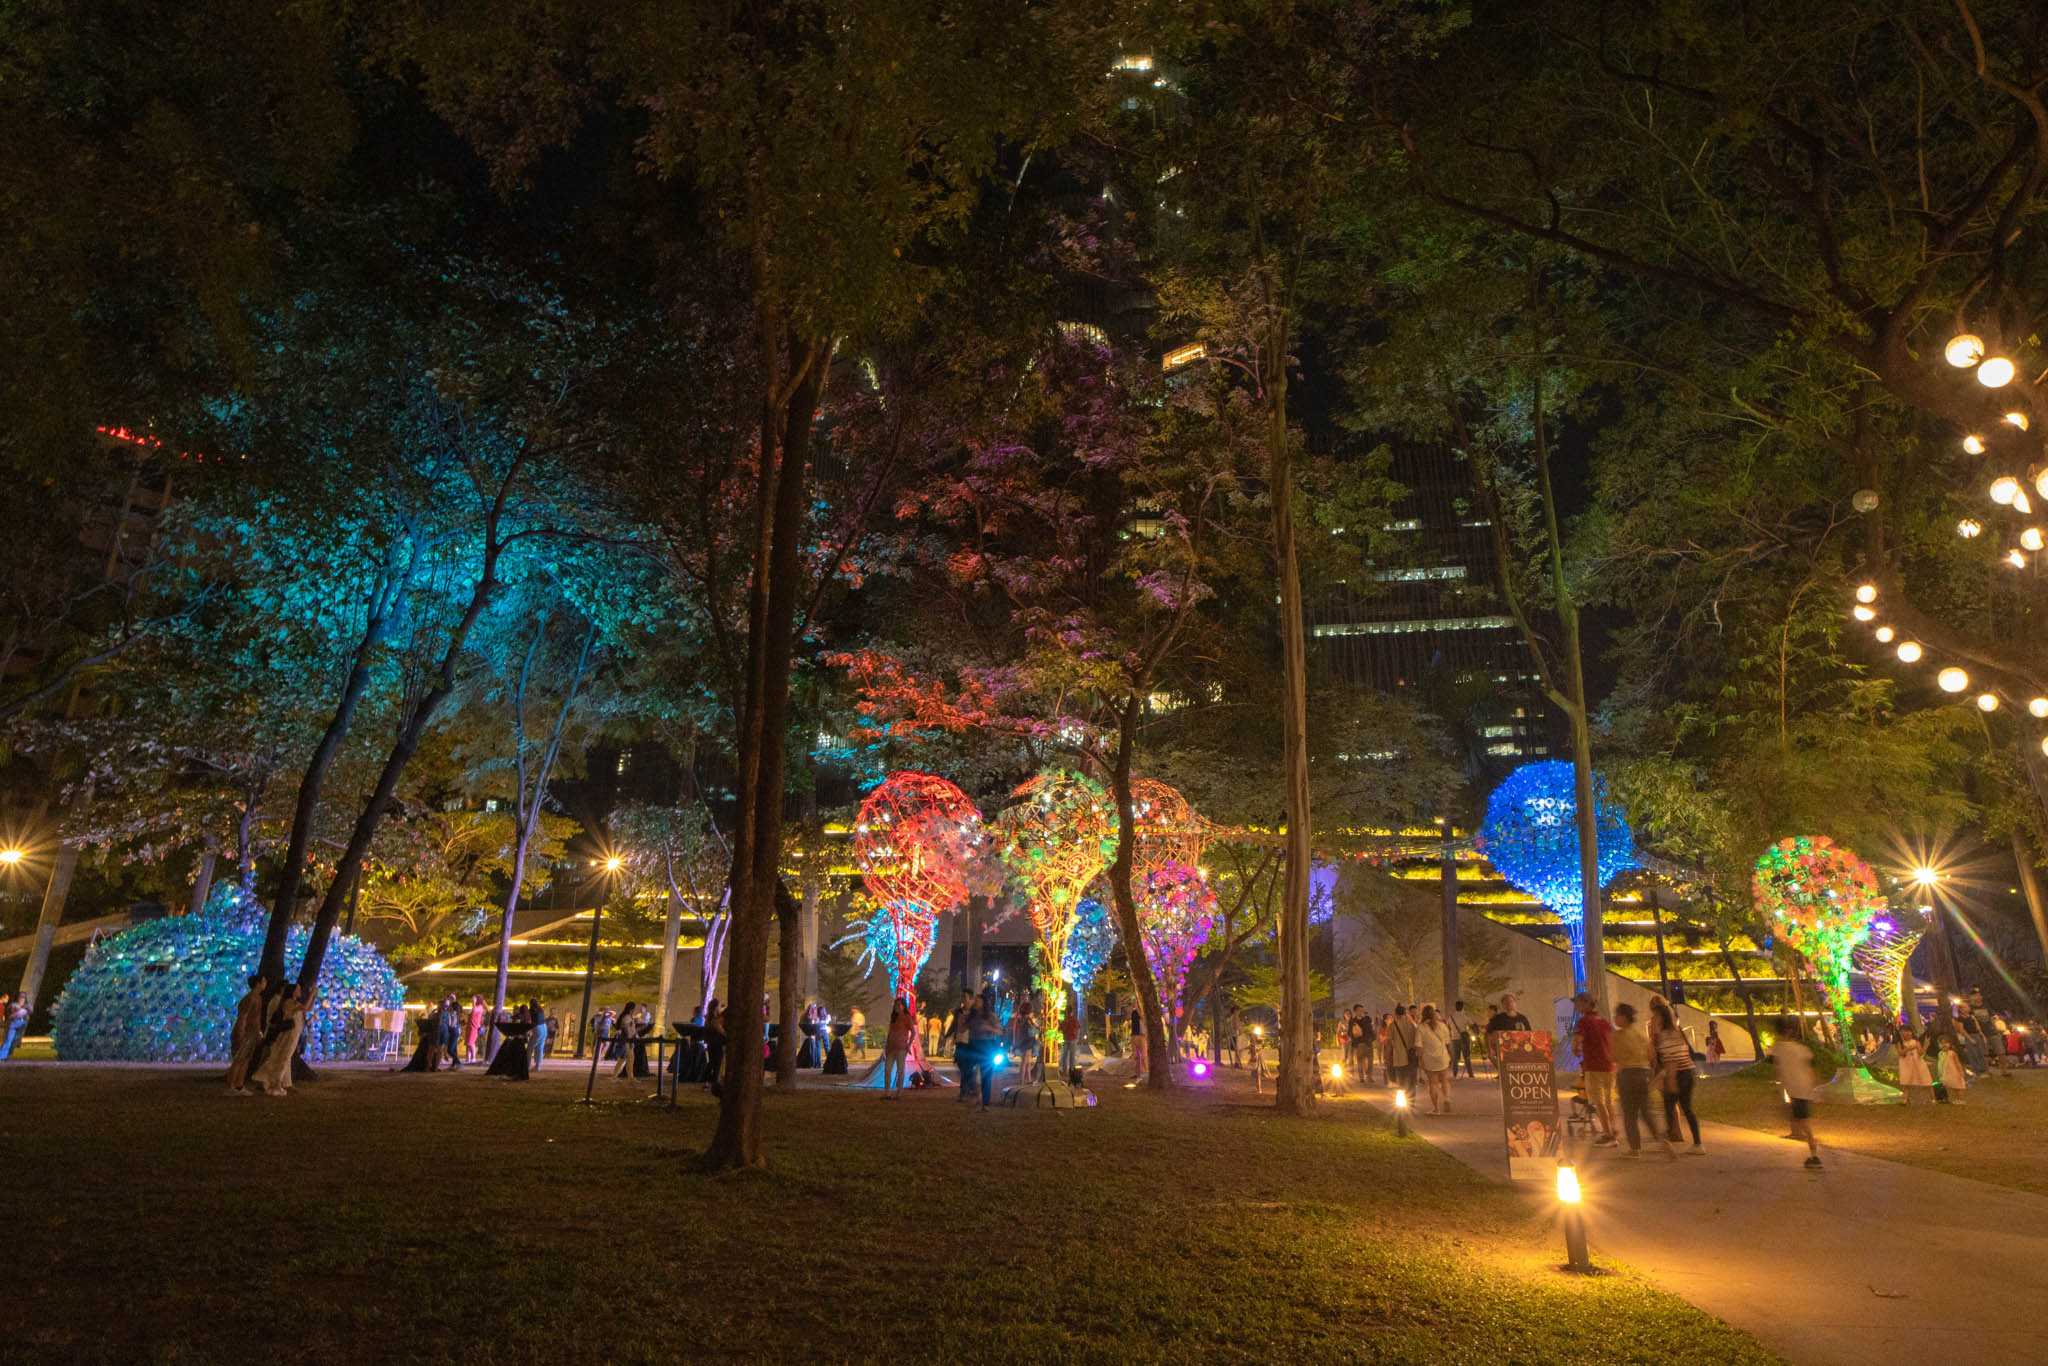 Elemento Exhibition at night at Ayala Triangle Festival of Lights